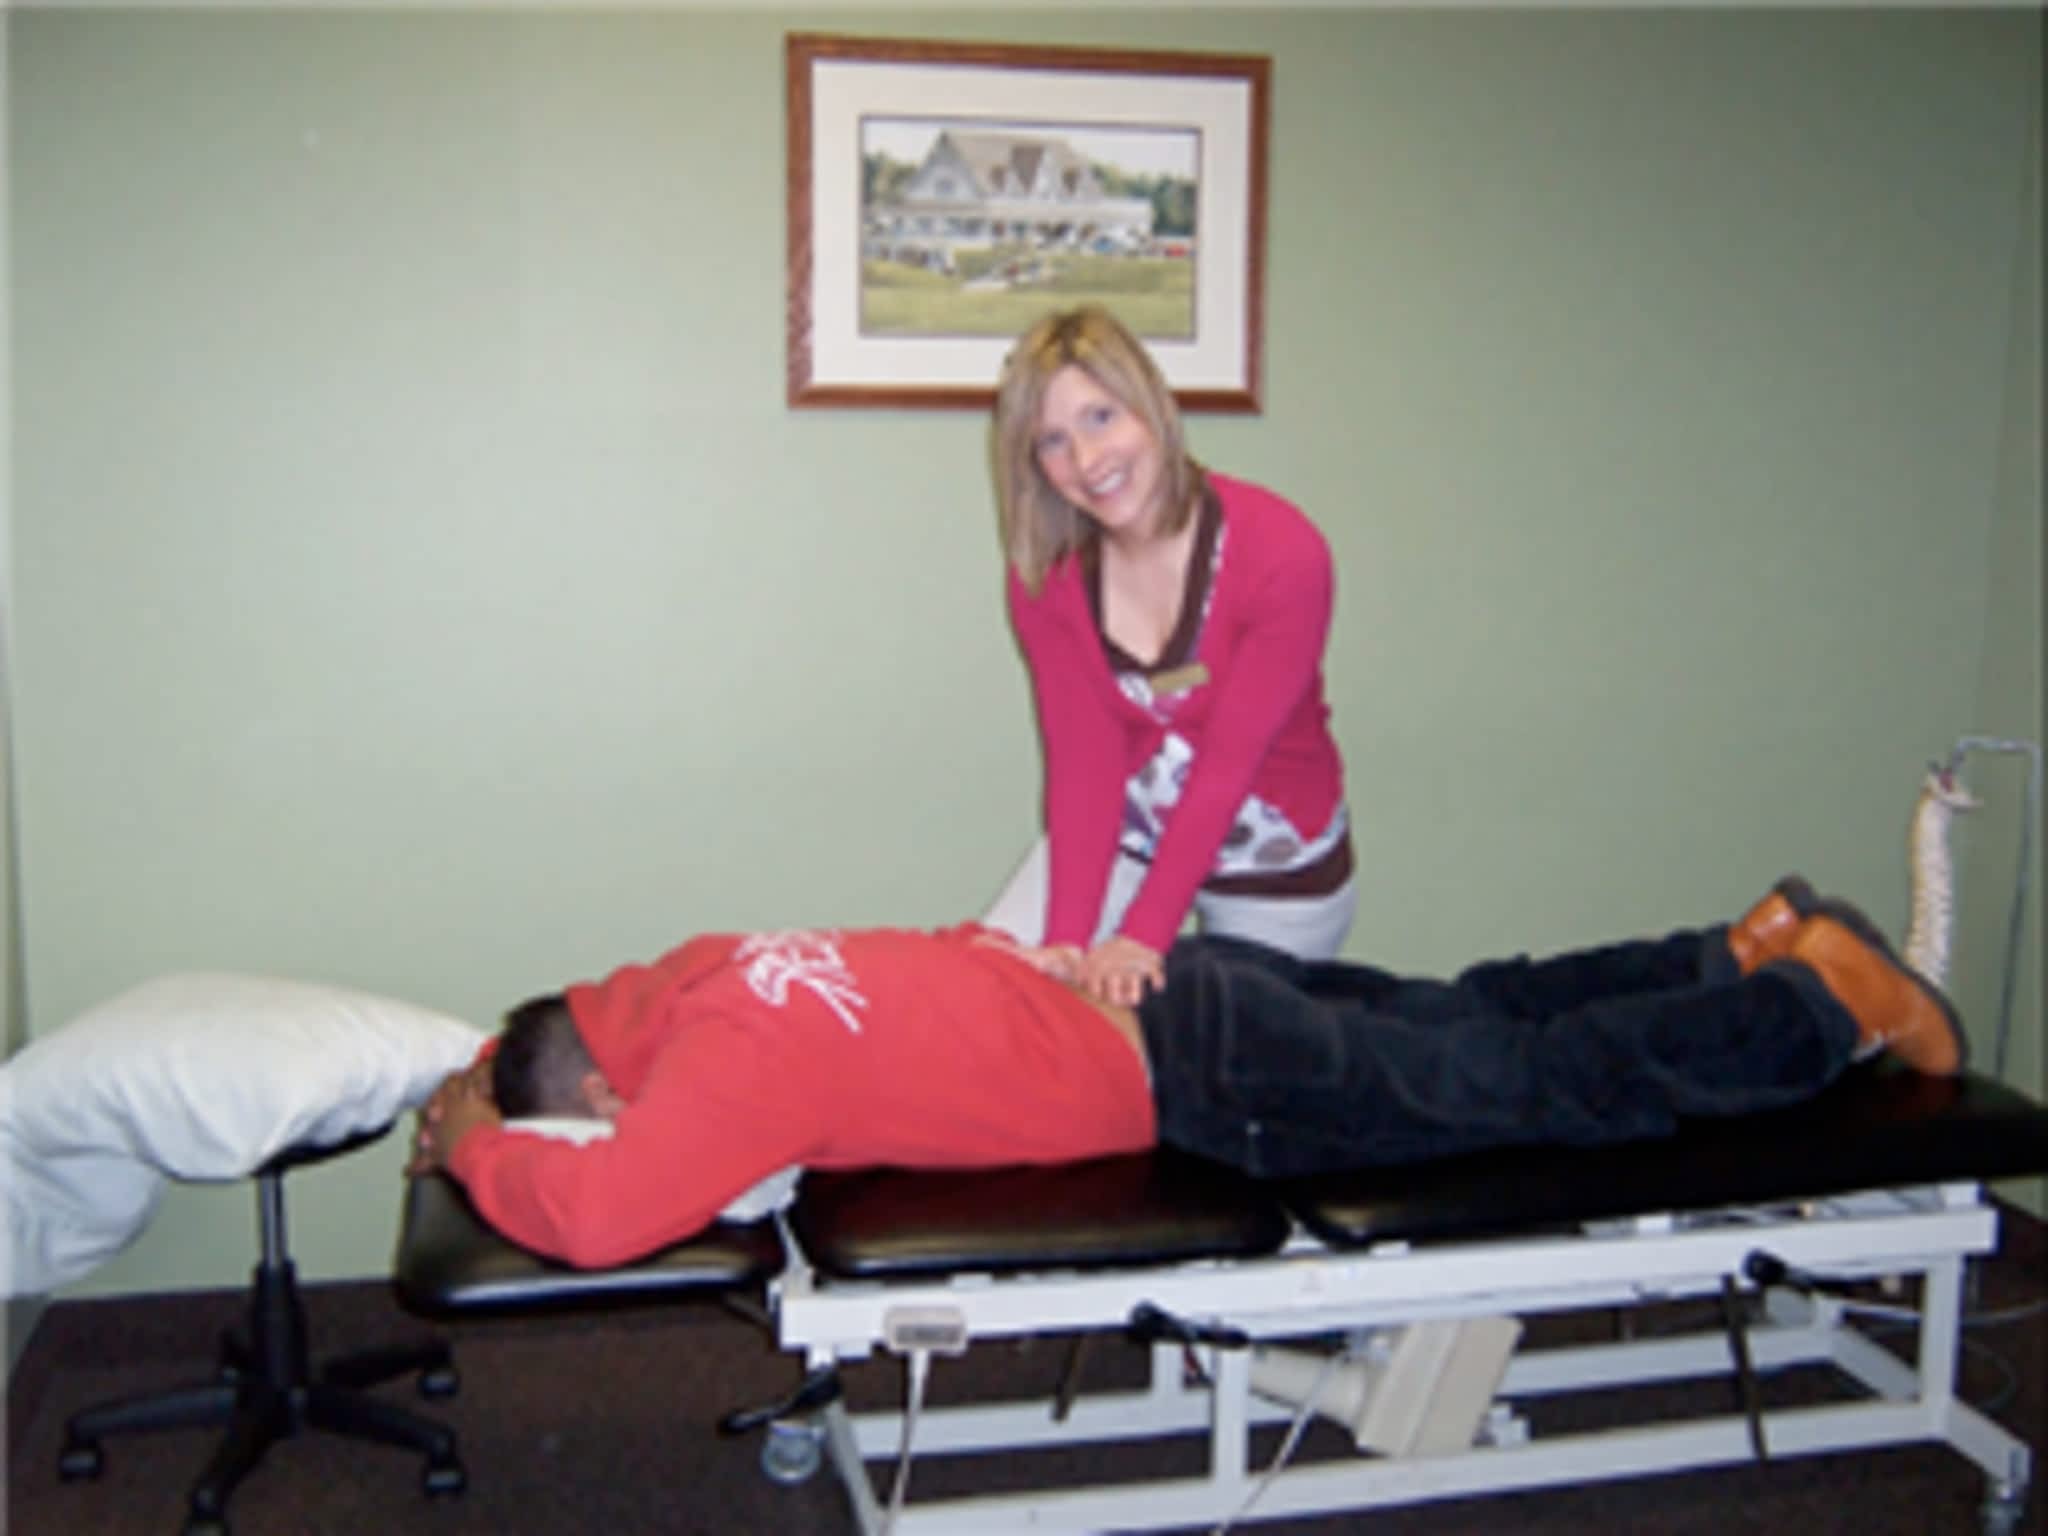 photo St Catharines Physiotherapy Centre